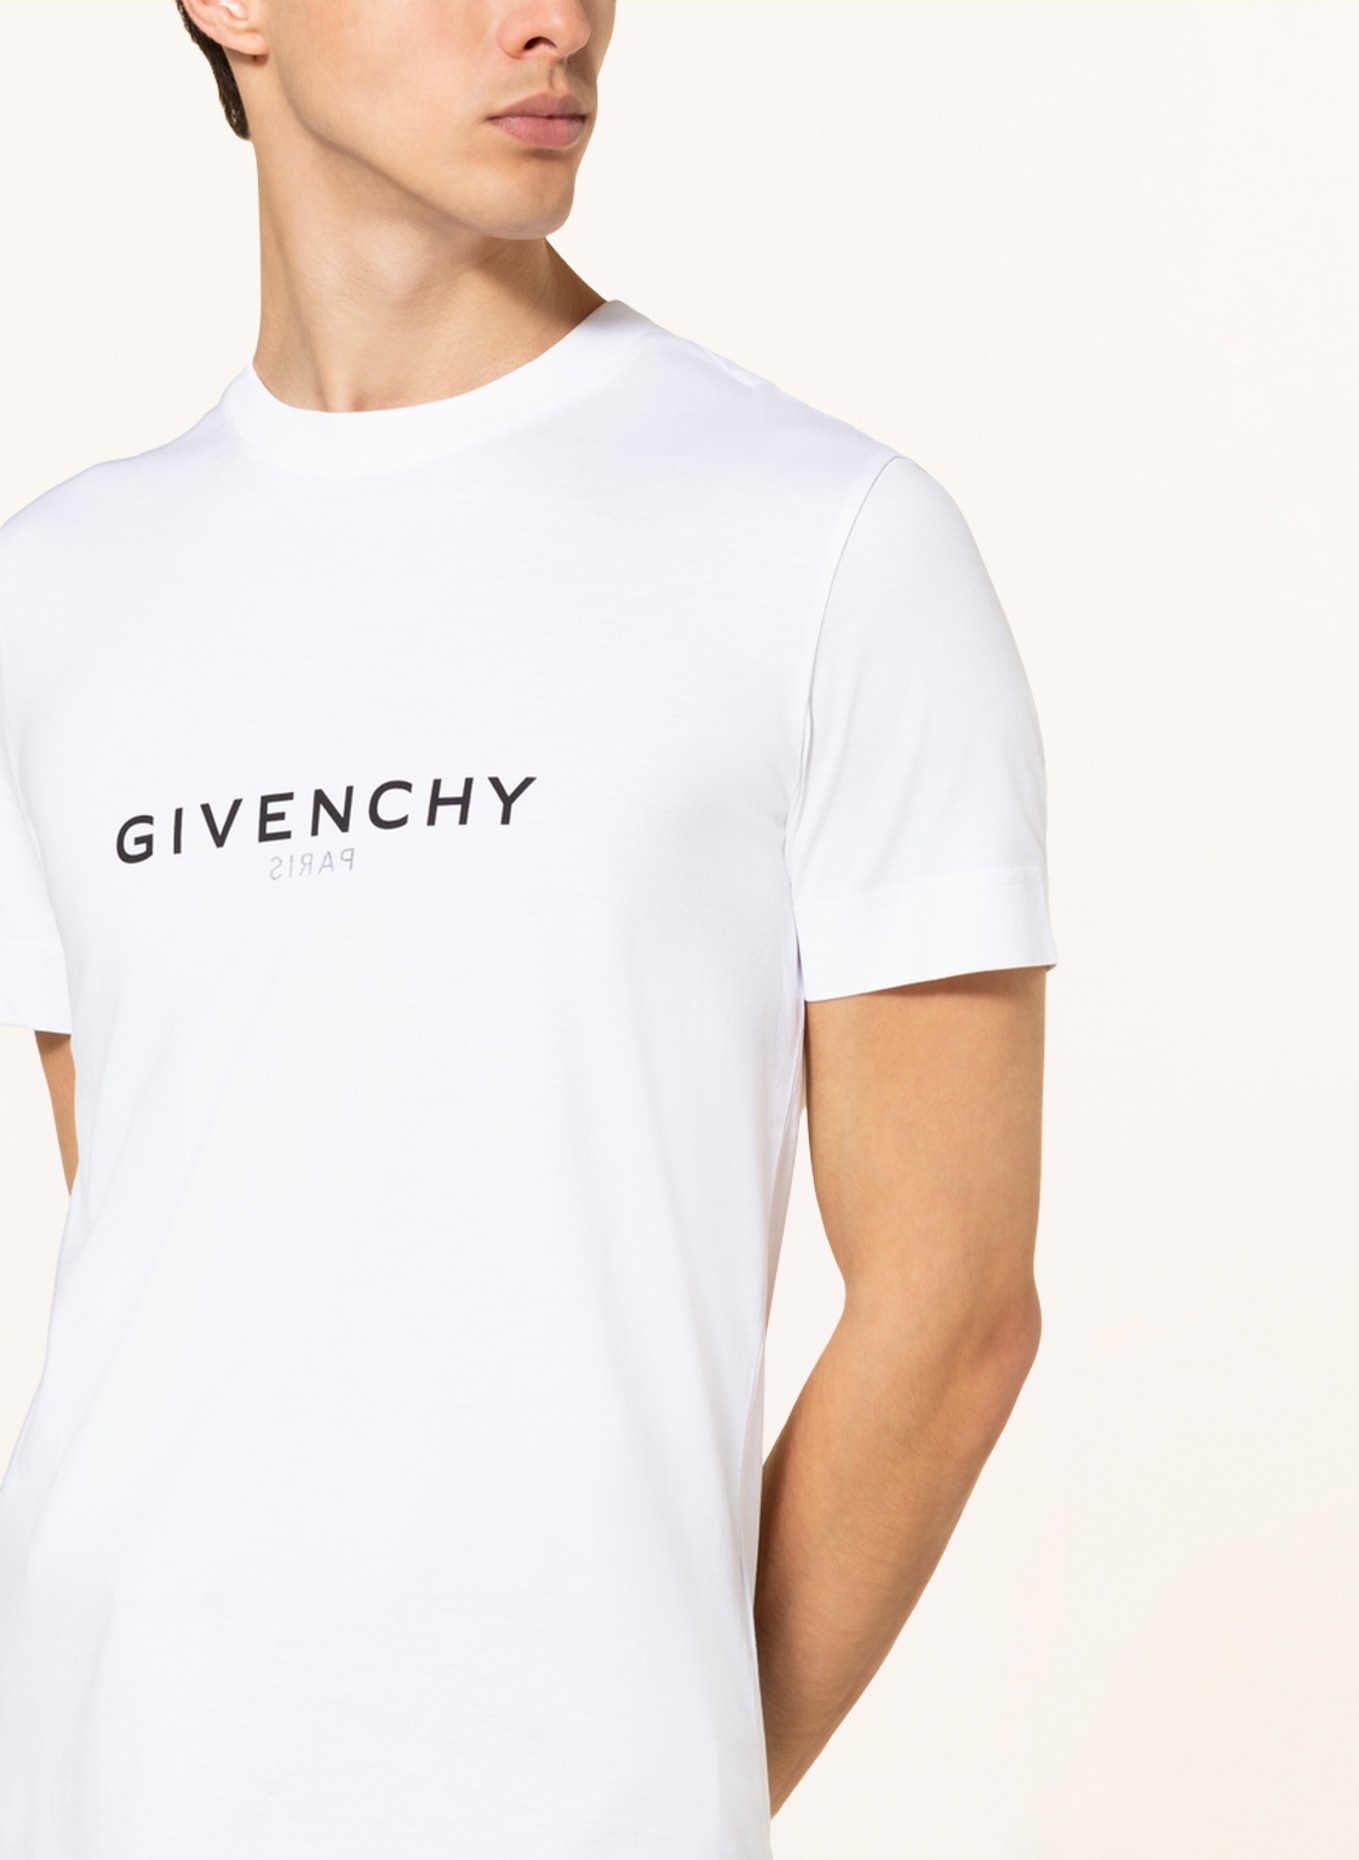 GIVENCHY T-Shirt, Farbe: WEISS (Bild 4)